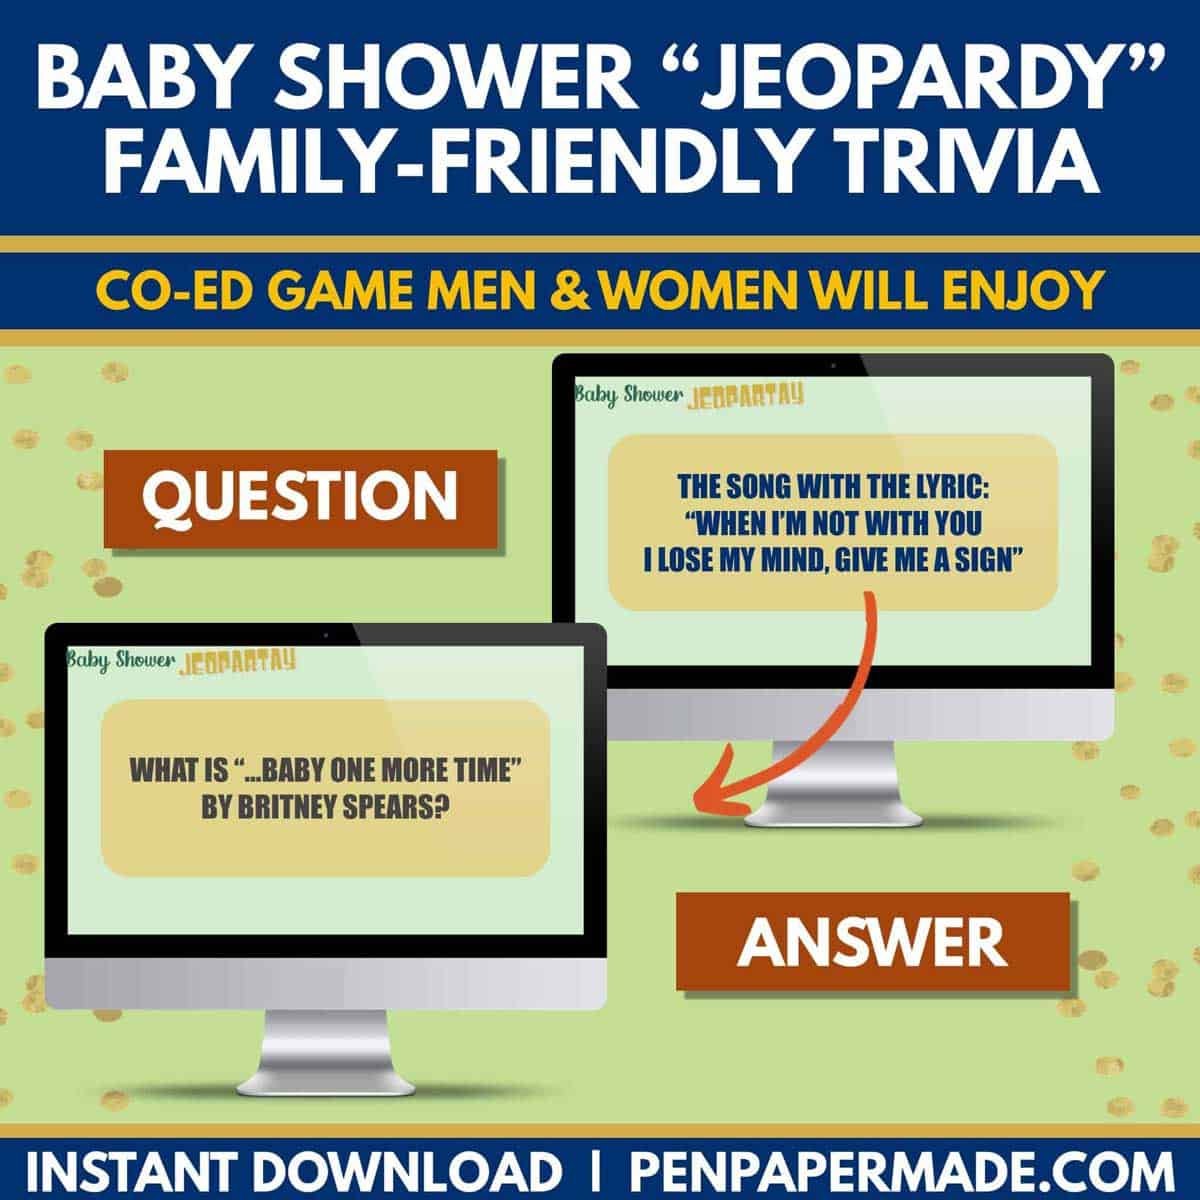 fun green baby shower jeopardy questions like matching song lyrics with baby in it.